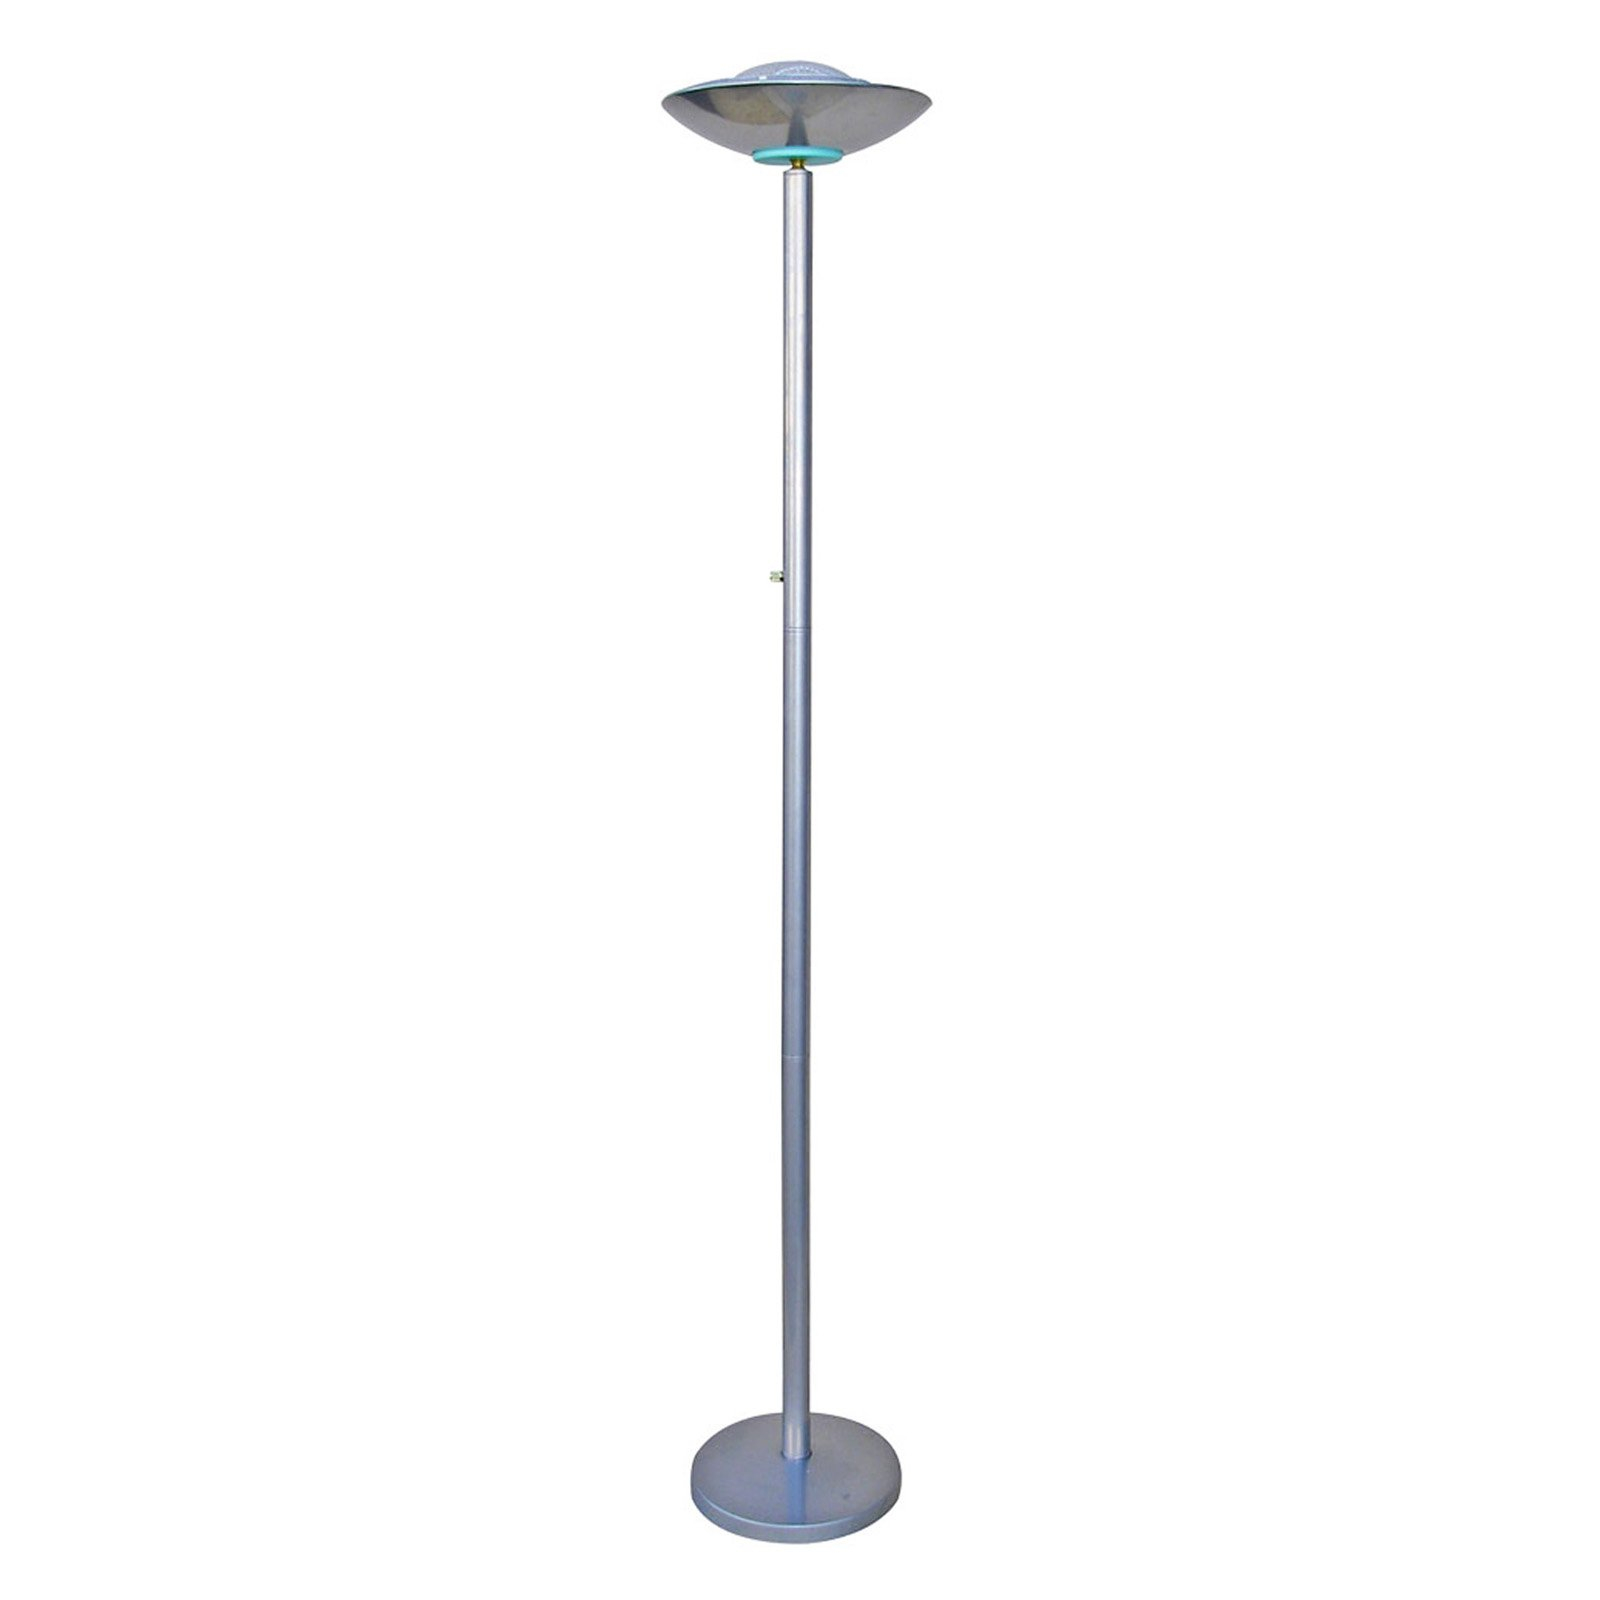 Ore International 190w Halogen Torchiere Floor Lamp Silver within dimensions 1600 X 1600